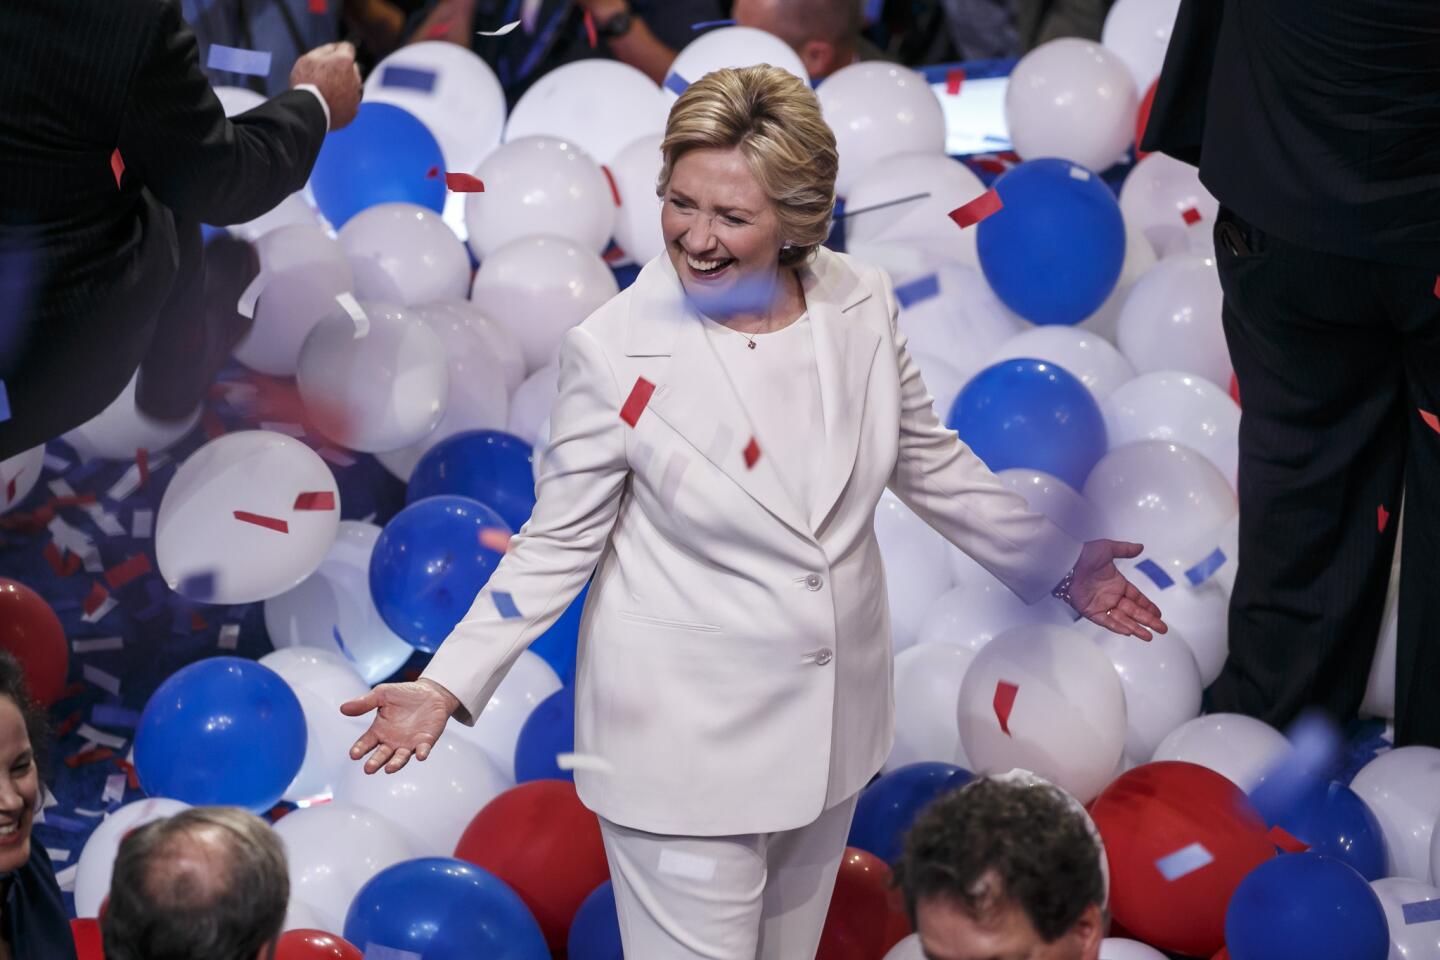 Hillary Clinton celebrates at the 2016 Democratic National Convention in Philadelphia.